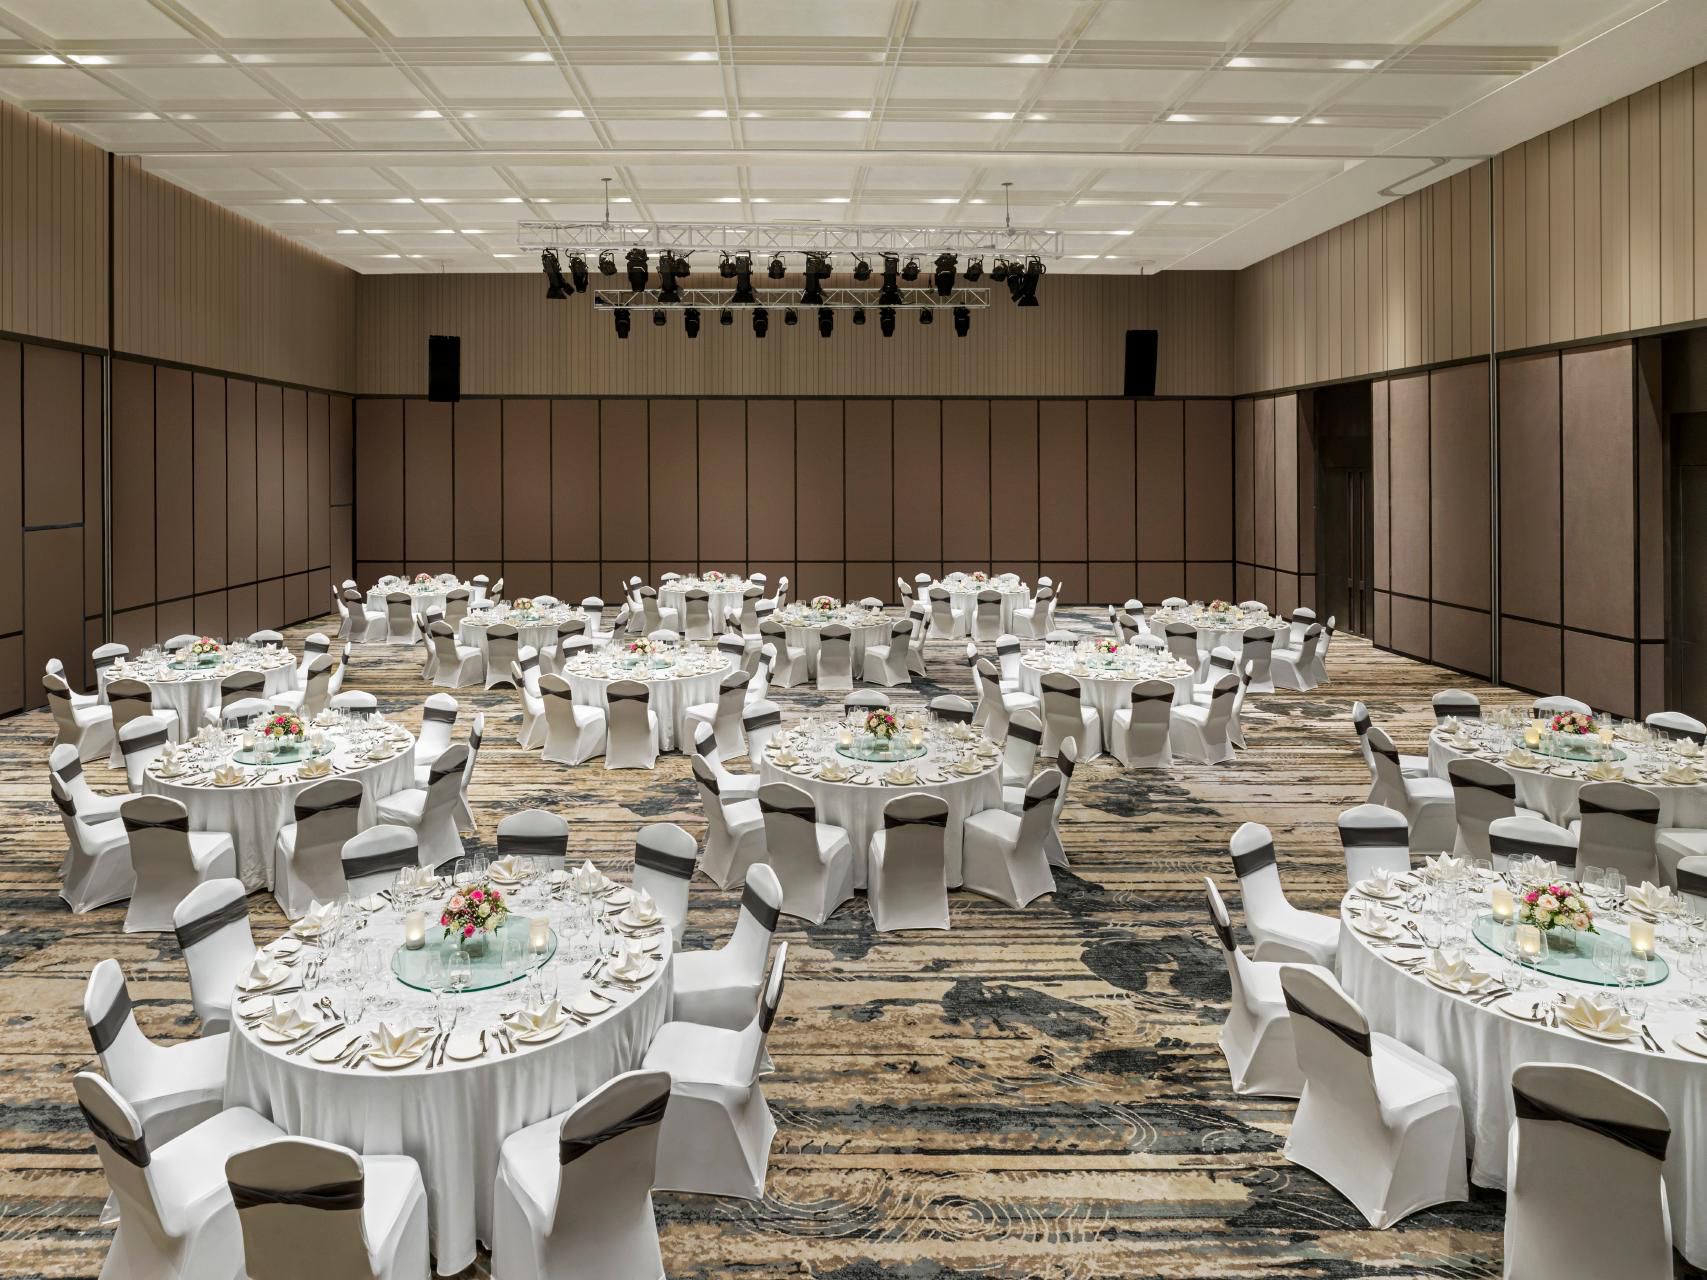 The resort’s first-class business and event venues include a spacious grand ballroom and three naturally lit meeting rooms equipped with state-of-the-art technologies. Equally suited for business and celebrations as well as weddings, banquets, and large conventions.